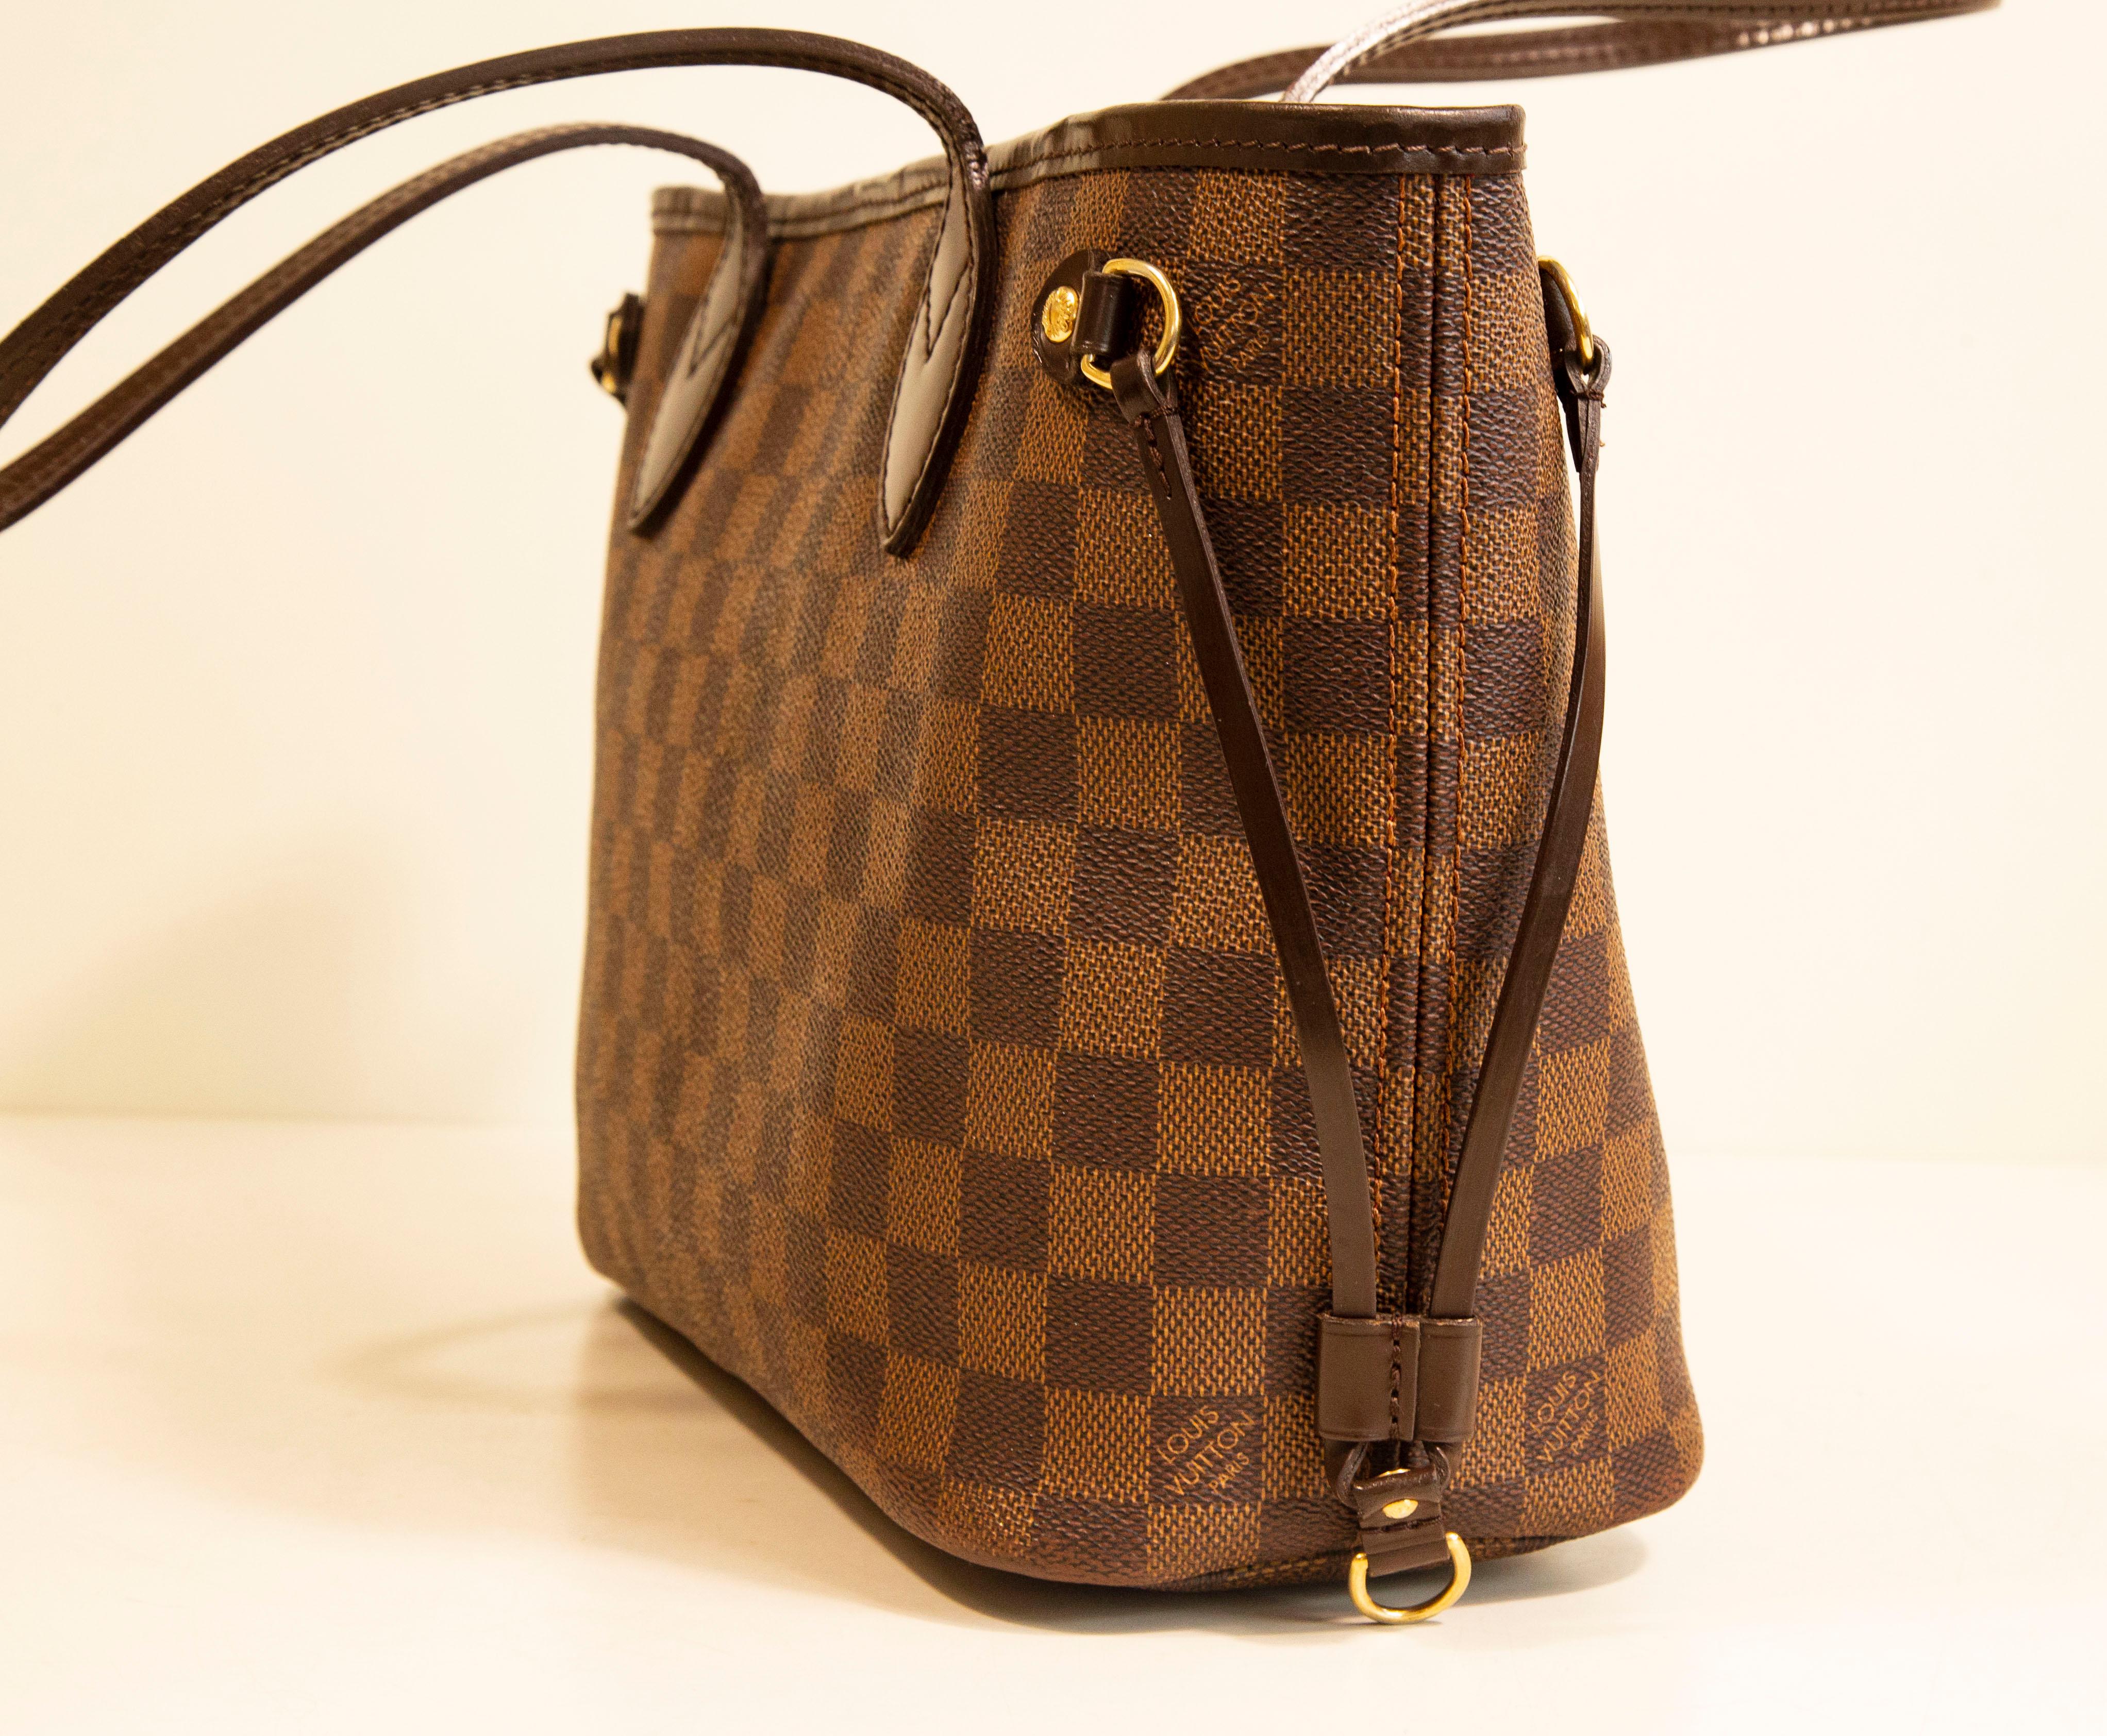 Louis Vuitton Neverfull PM Tote Shoulder Bag in Damier Ebene For Sale 2